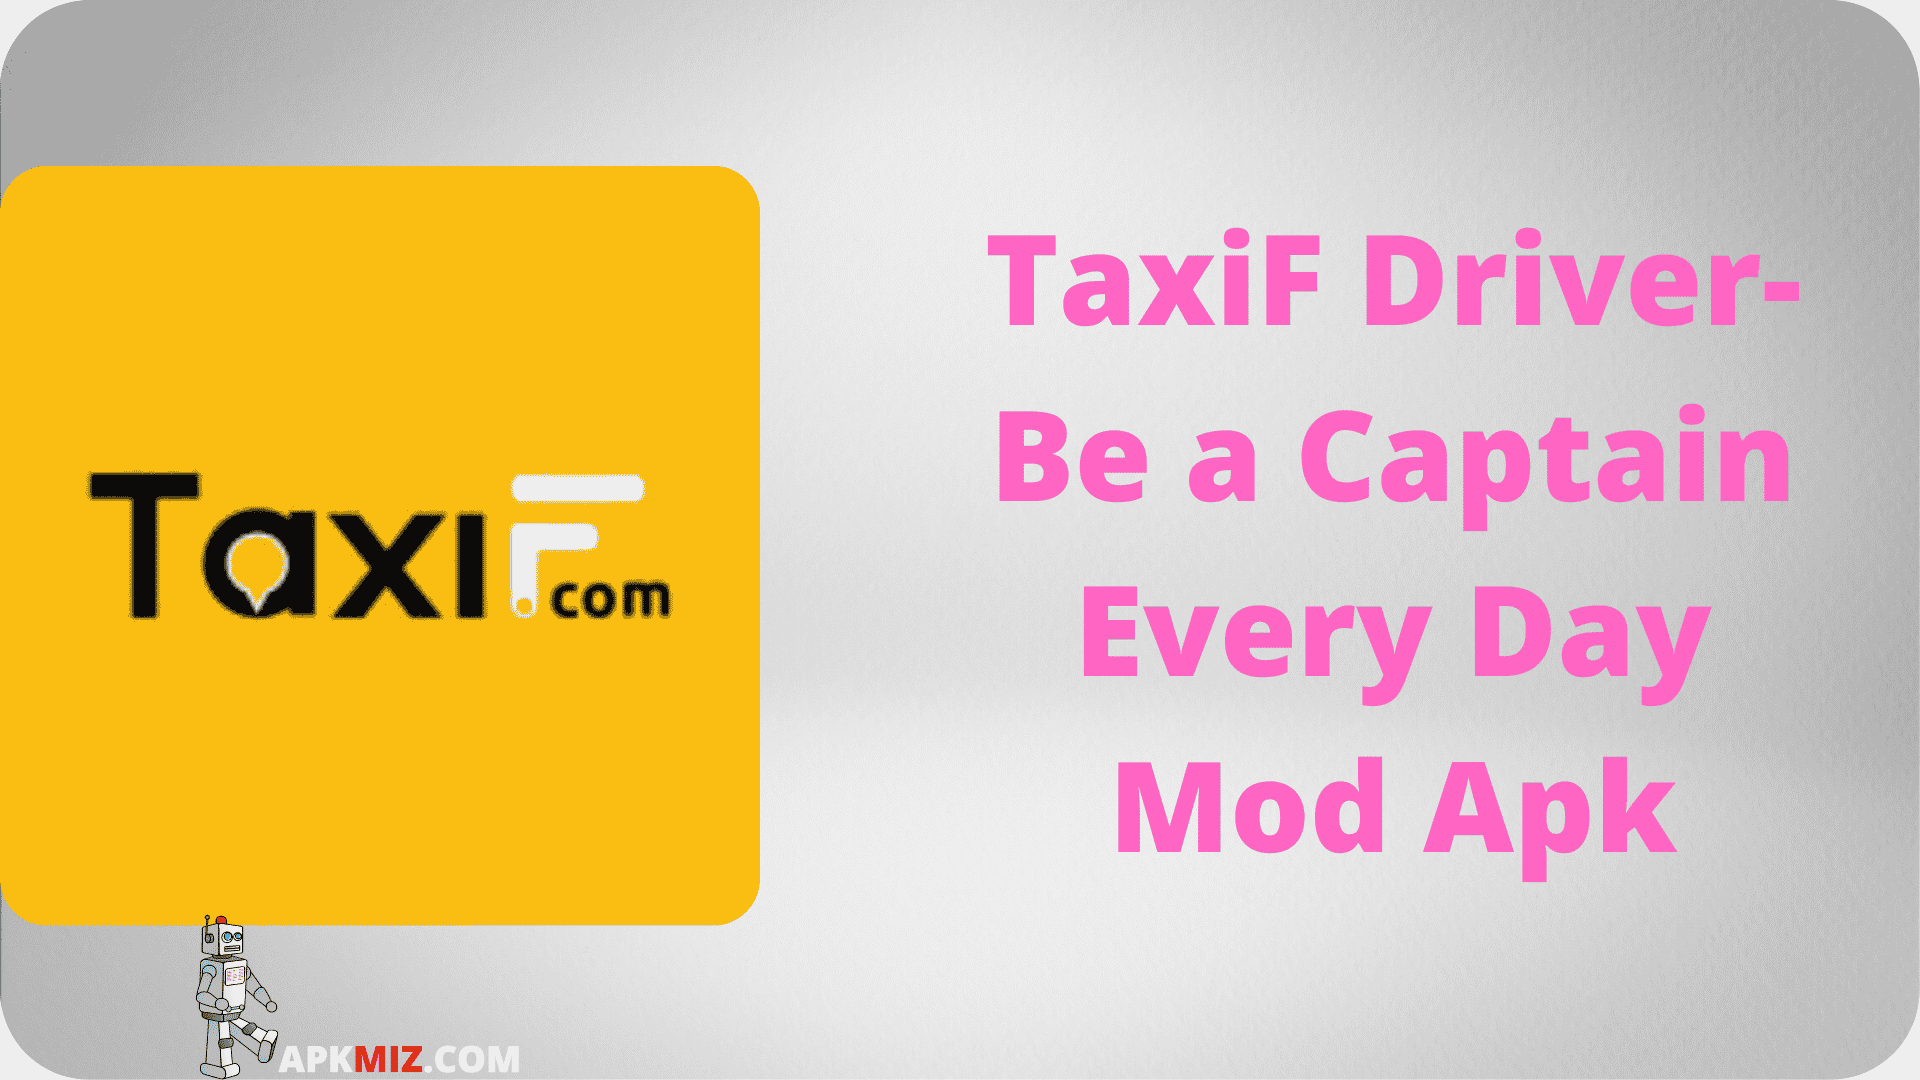 TaxiF Driver- Be a Captain Every Day Mod Apk